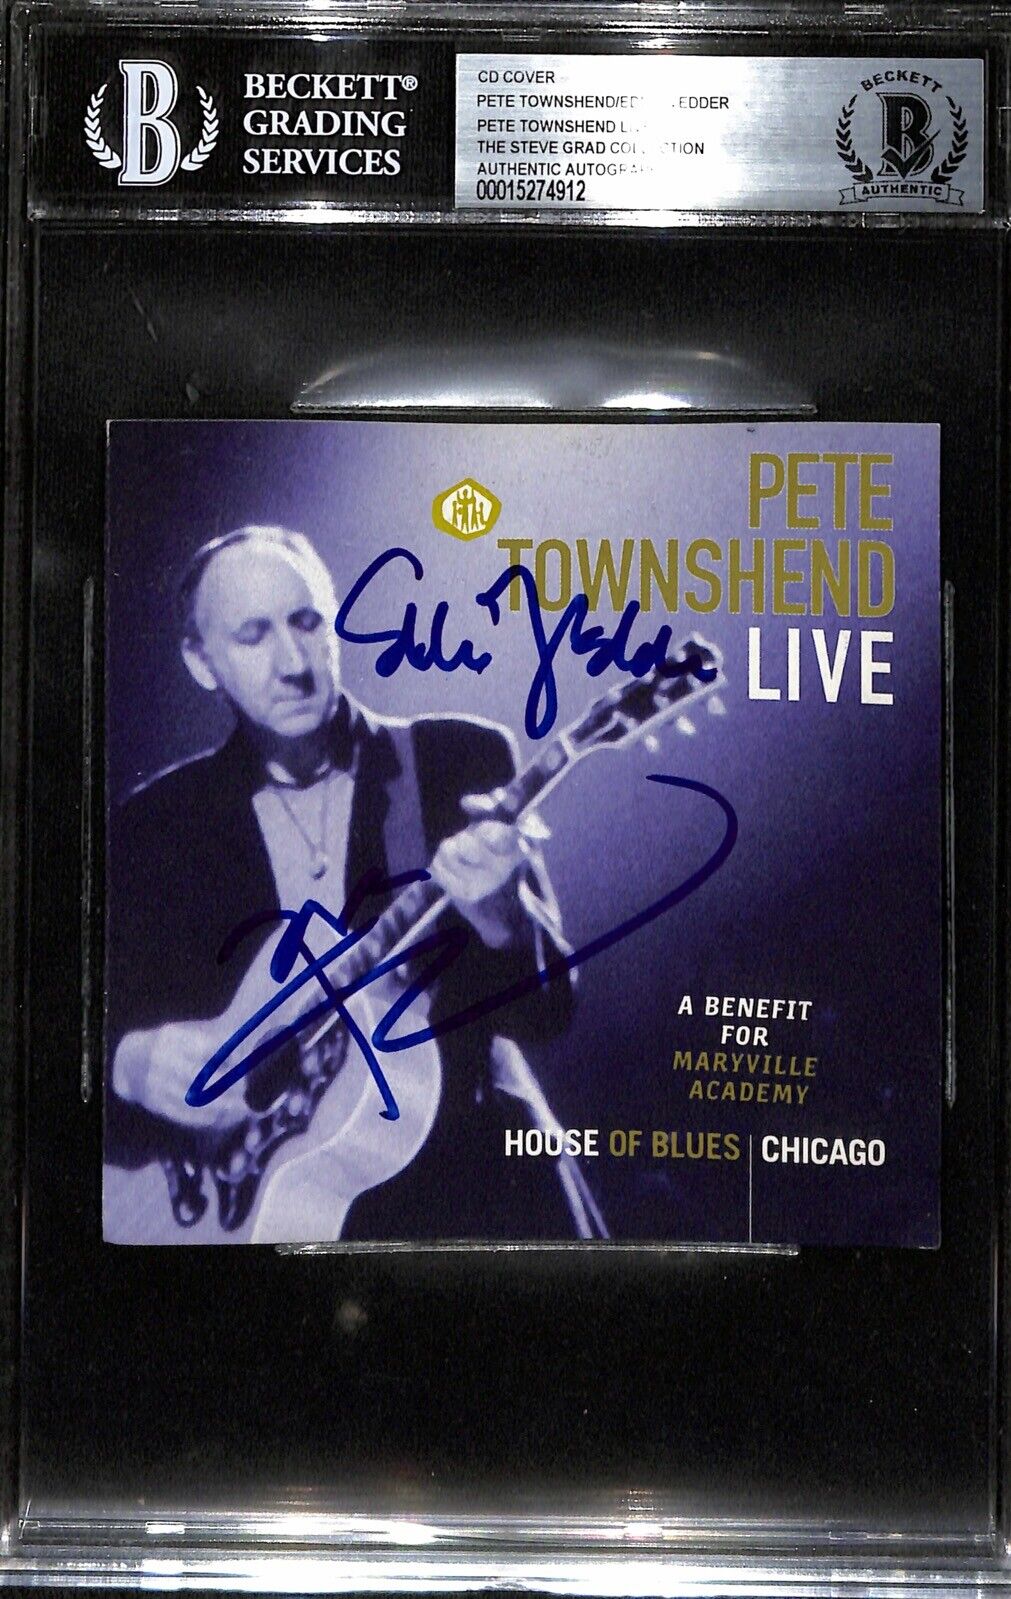 Pete Townshend & Eddie Vedder Signed “Live”  CD Cover BECKETT (Grad Collection)